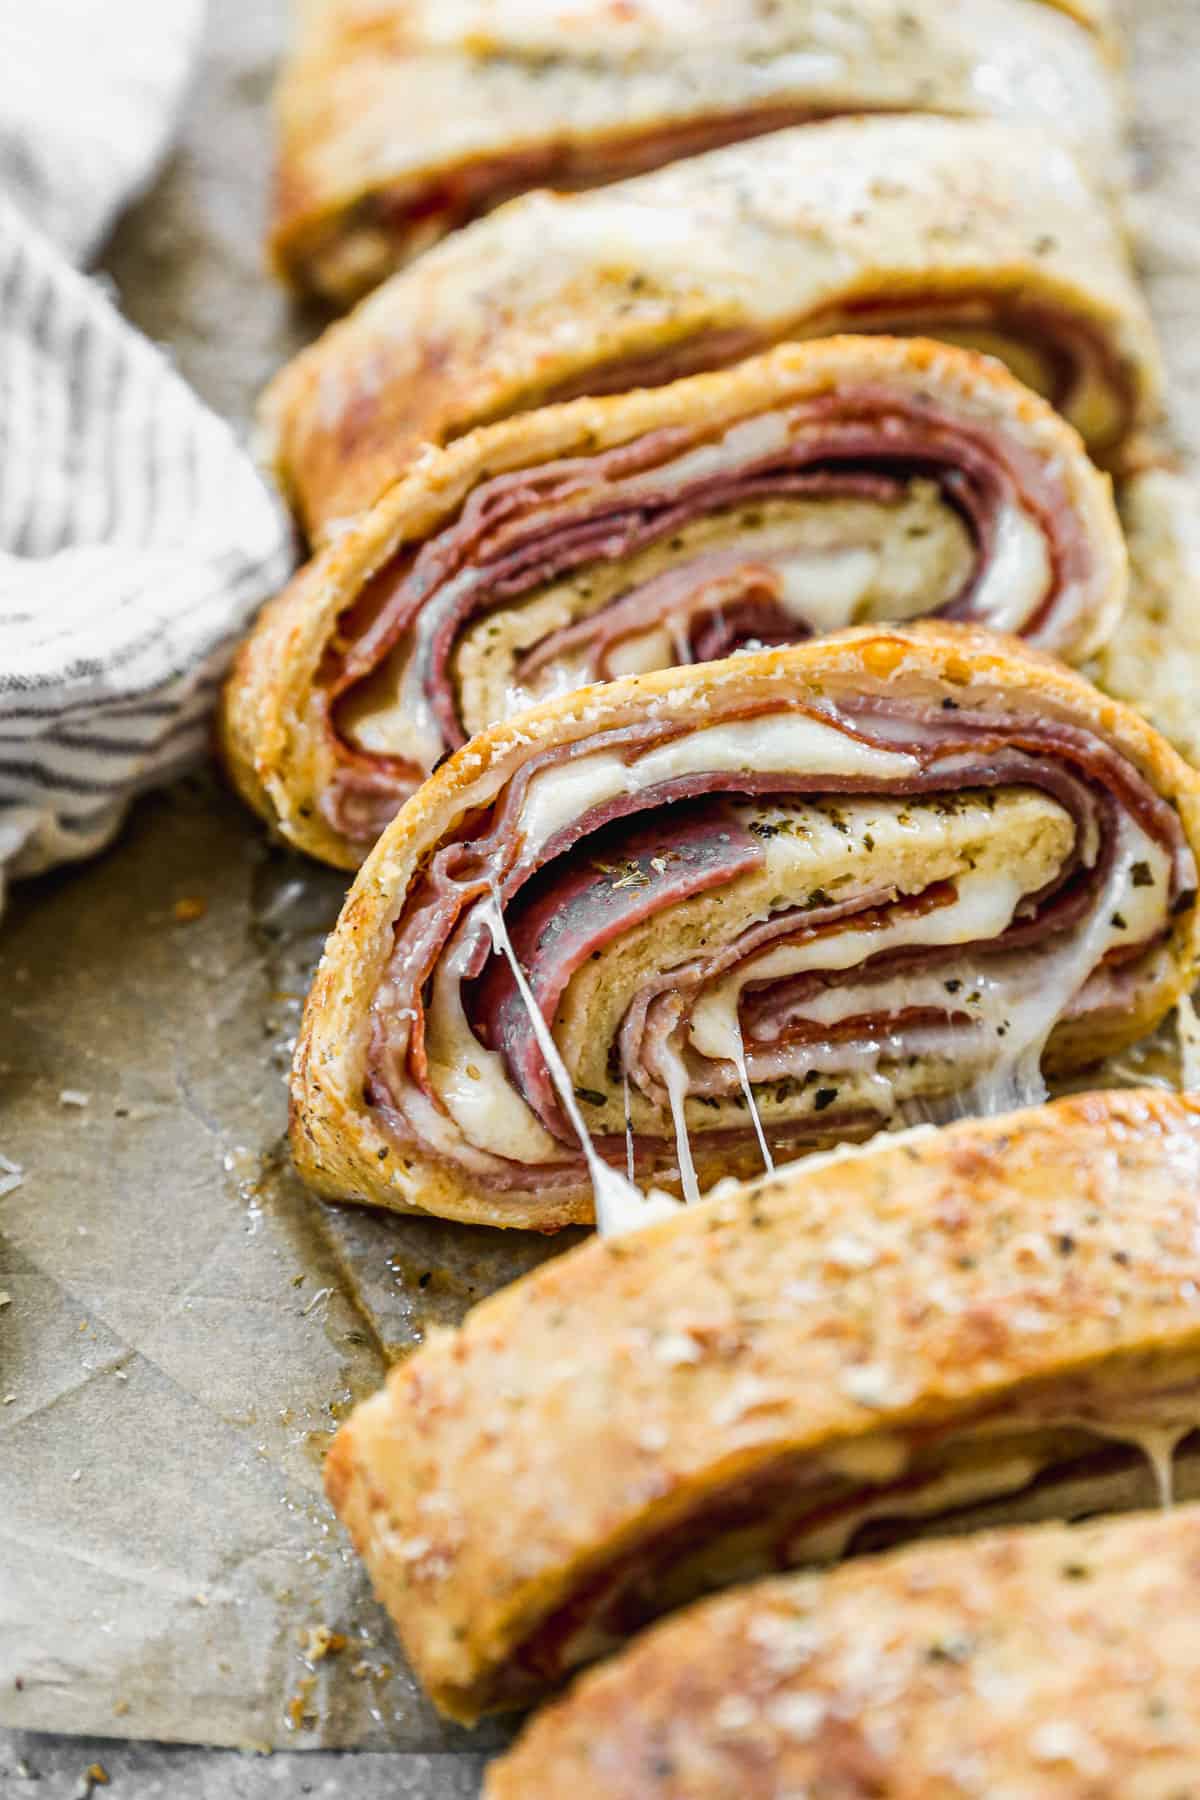 A pepperoni stromboli recipe sliced and ready to be enjoyed.